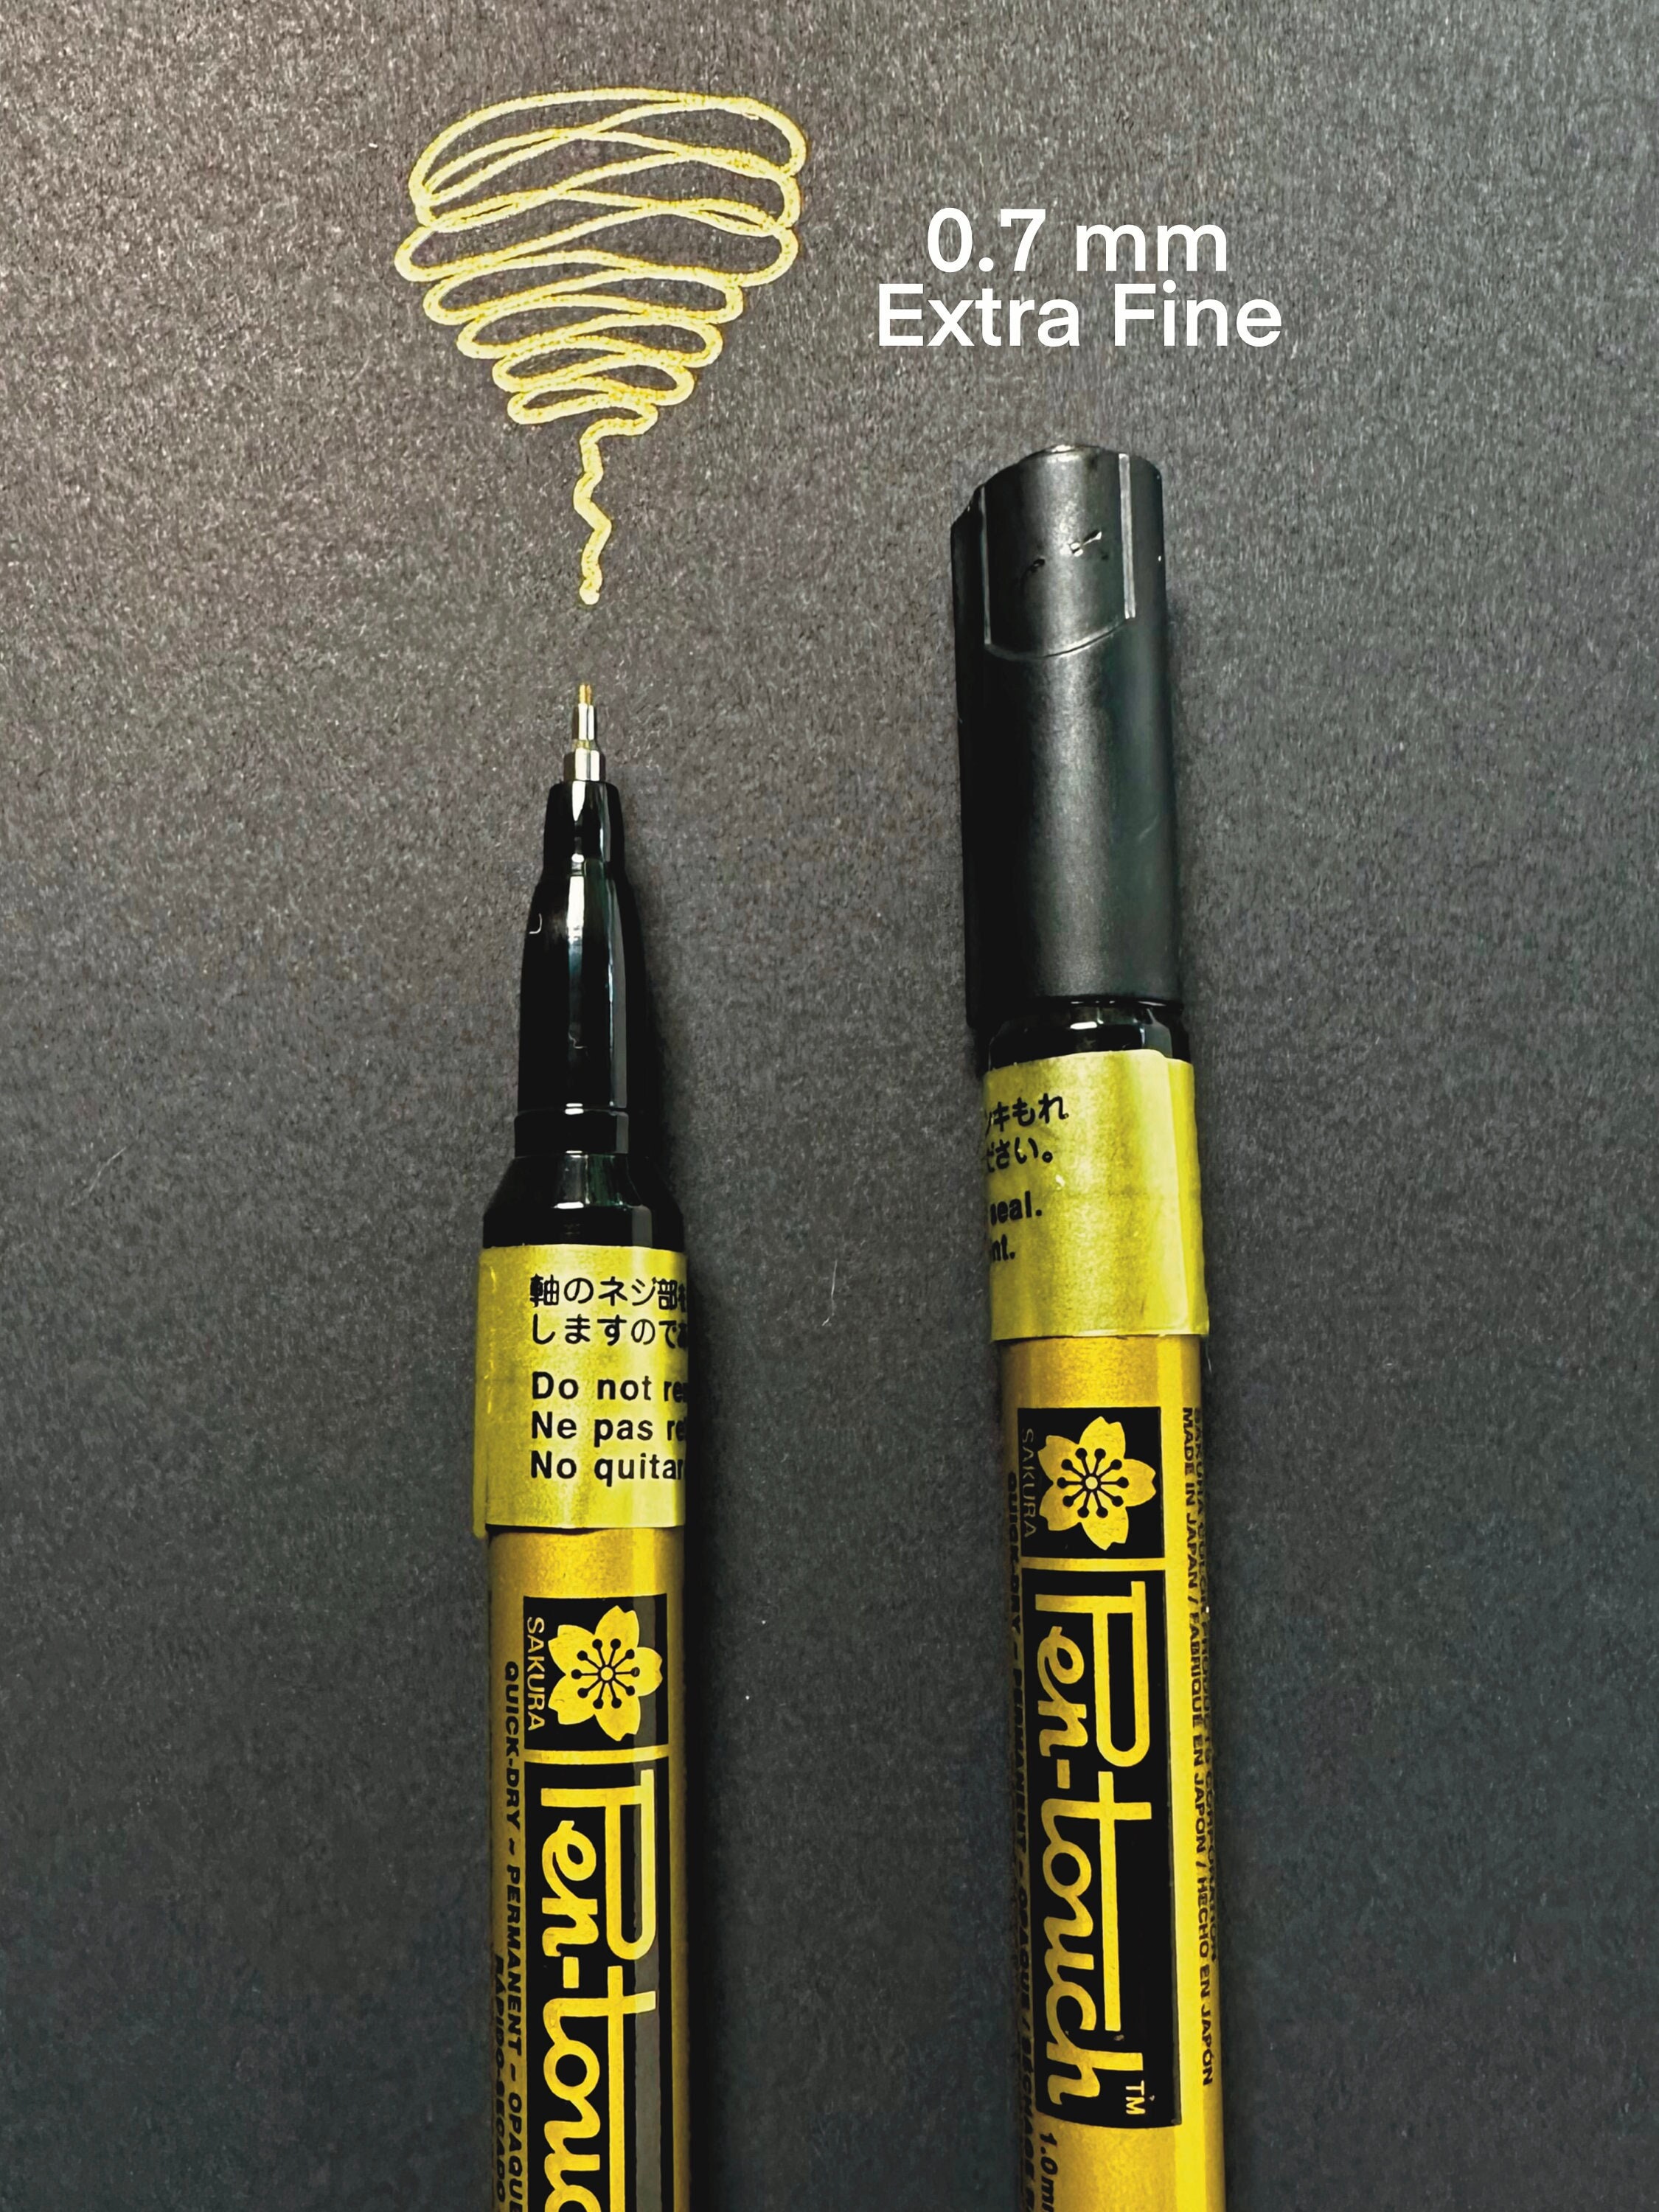 Grabie perfect markers for inking. Fine nib for perfect lines and